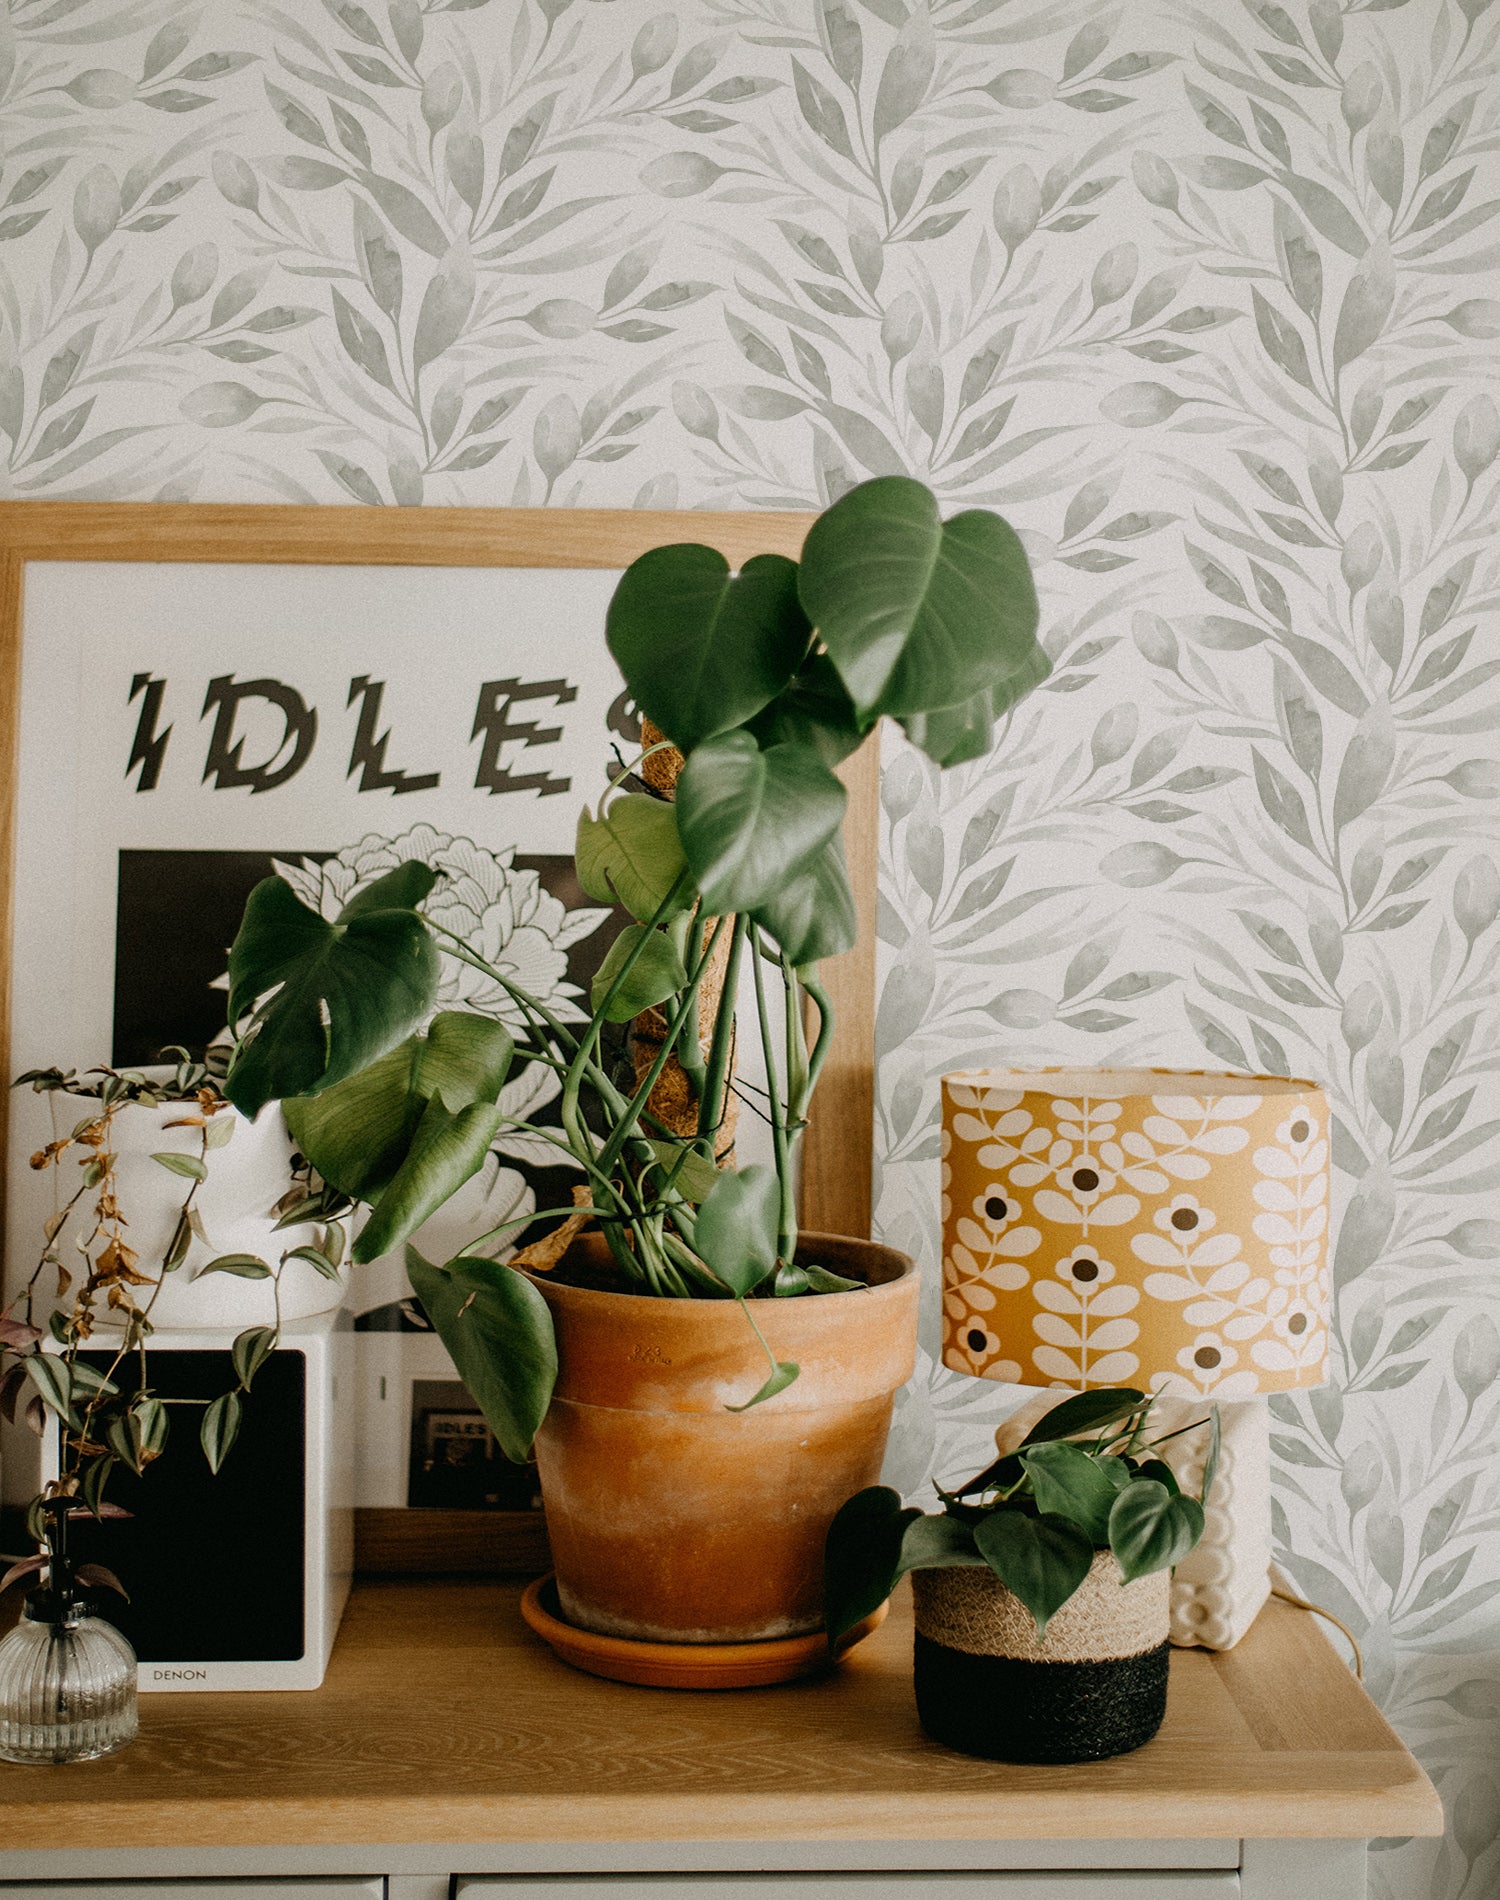 A vibrant home office setup decorated with Watercolour Spring Leaf Wallpaper, complemented by green houseplants and a modern lamp with a patterned shade, enhancing the room's lively yet peaceful nature